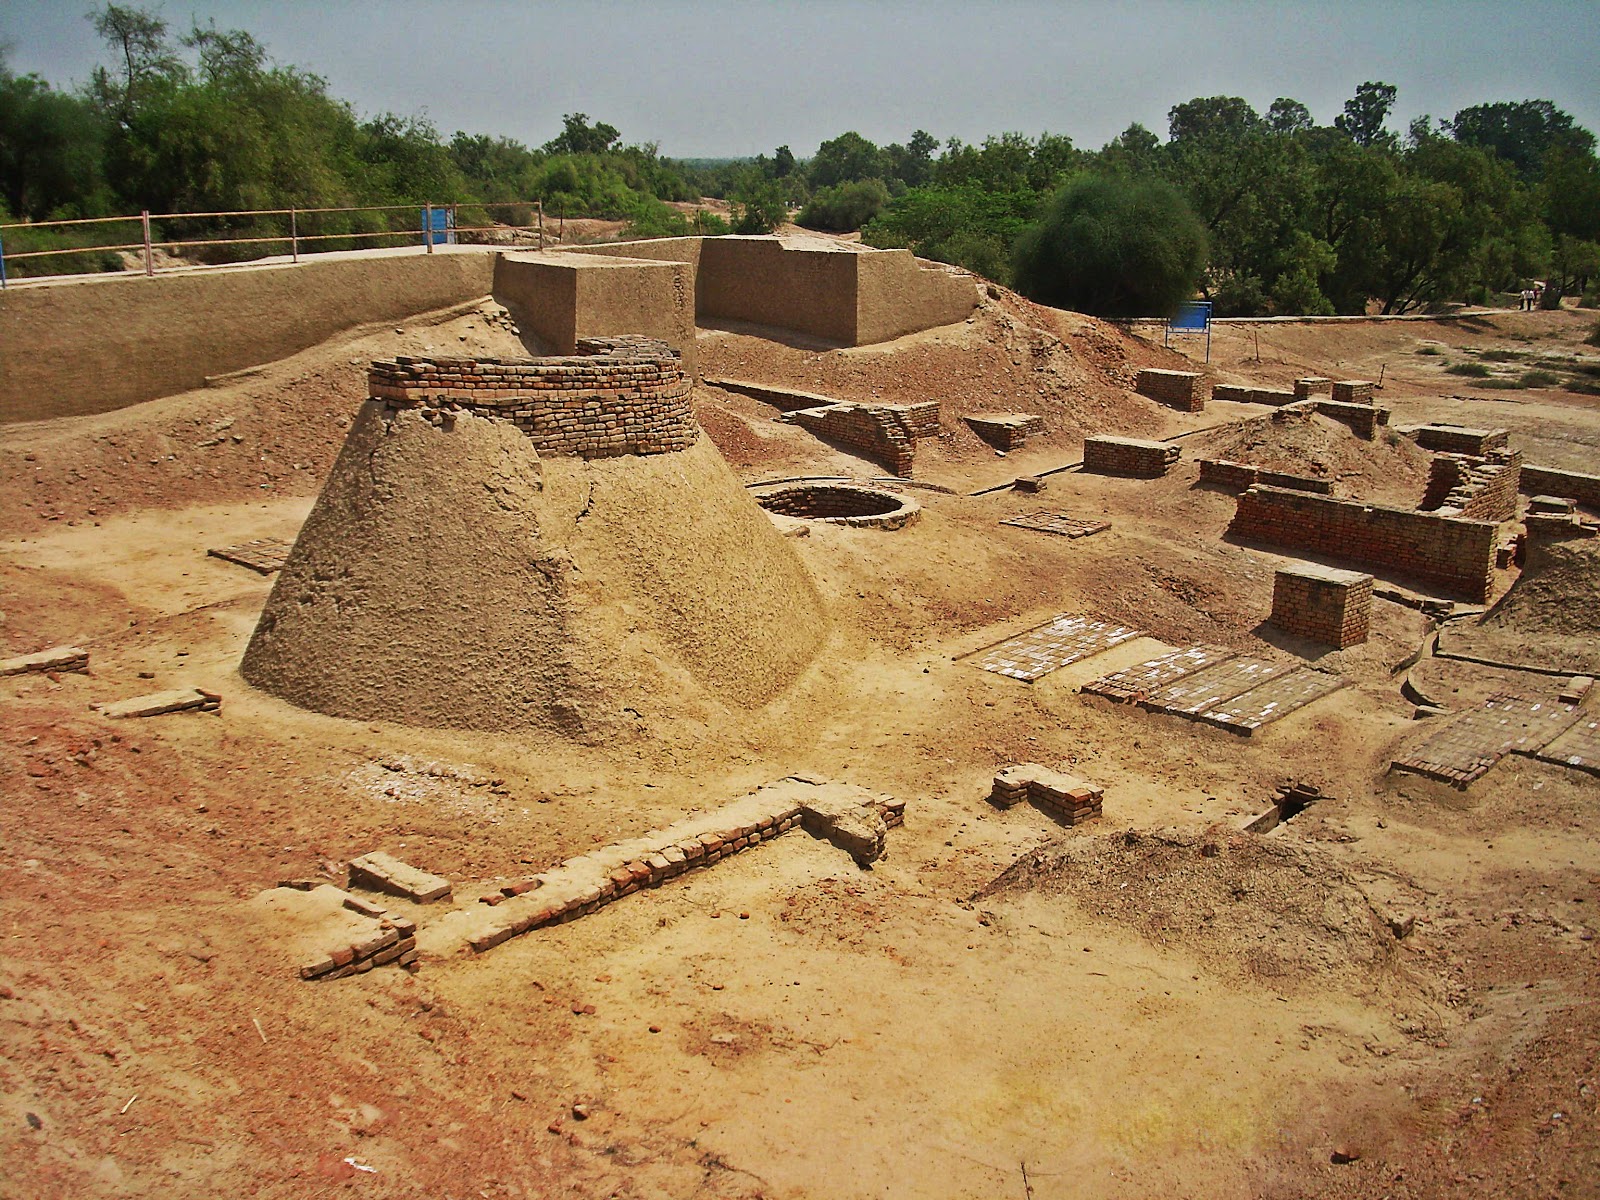 Archaeological Site for Harappa | Excavation of this ancient city began in 1920. | Author: Hassan Nasir | Source: Wikimedia Commons | License: CC BY-SA 3.0